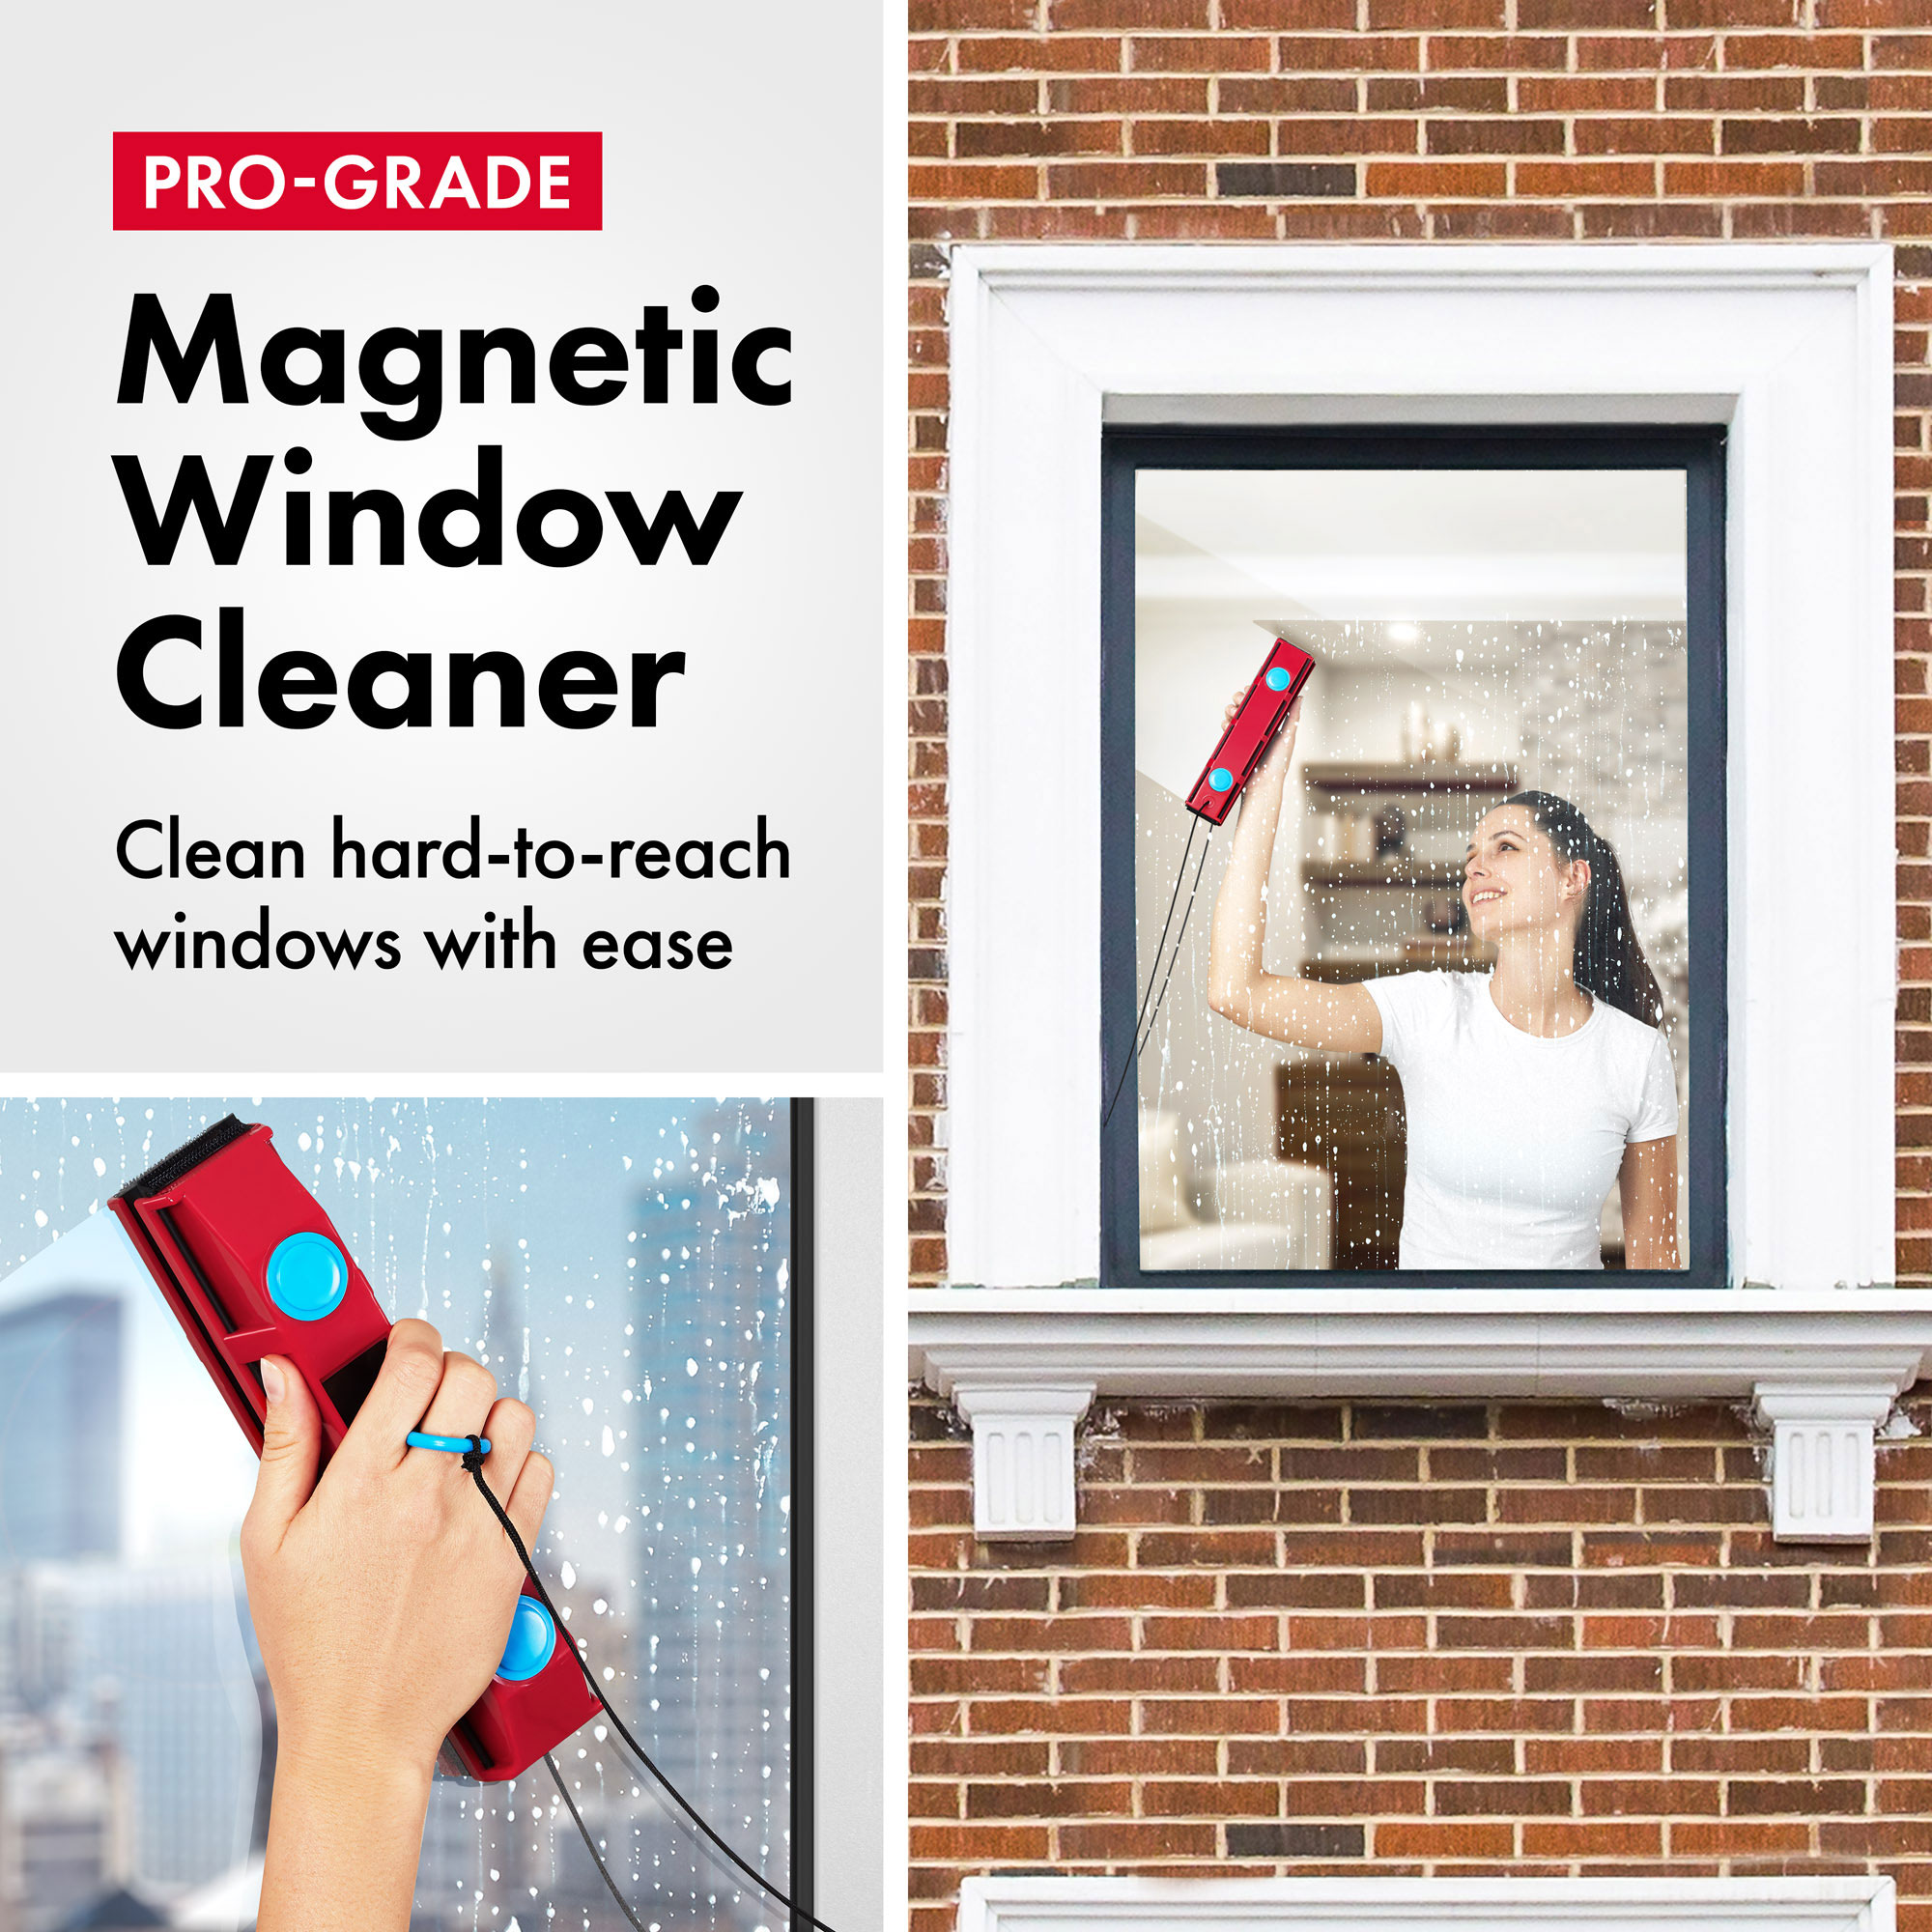 MAGNETIC WINDOW CLEANER 8-18MM GLASS